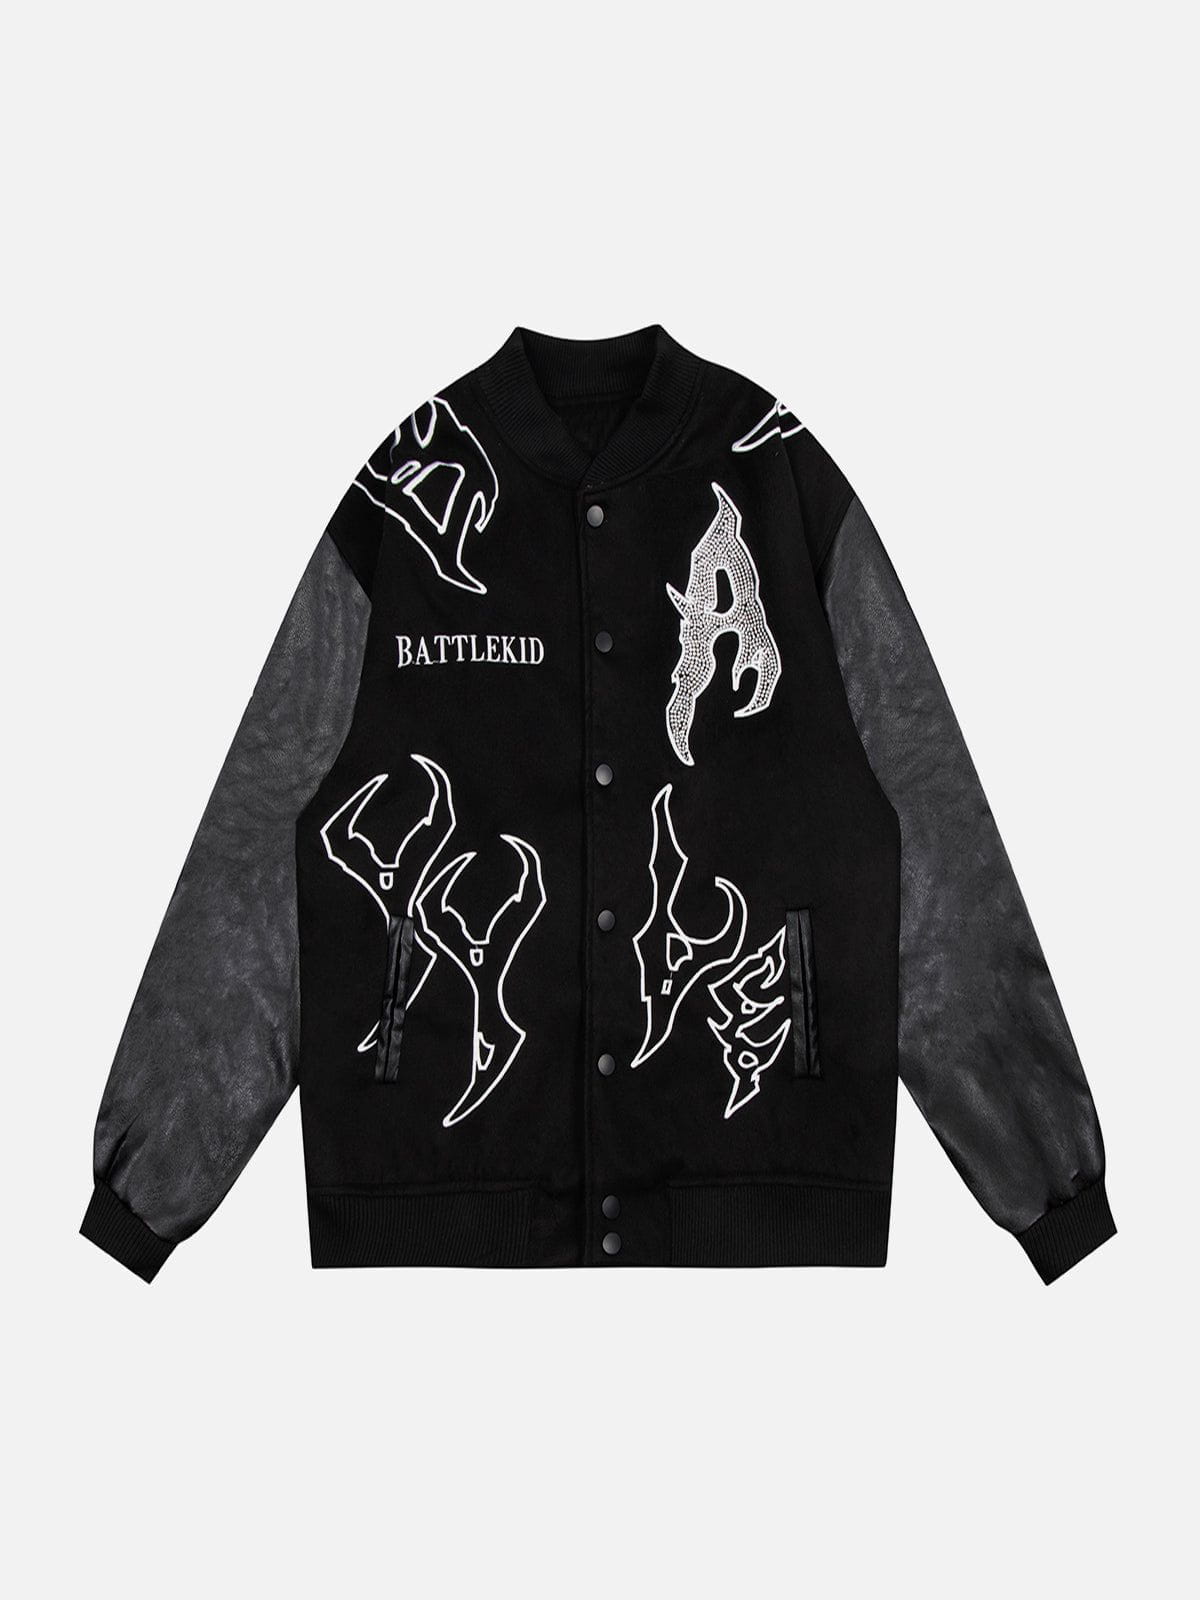 Hot Drilling Gothic Letter Varsity Jacket Streetwear Brand Techwear Combat Tactical YUGEN THEORY